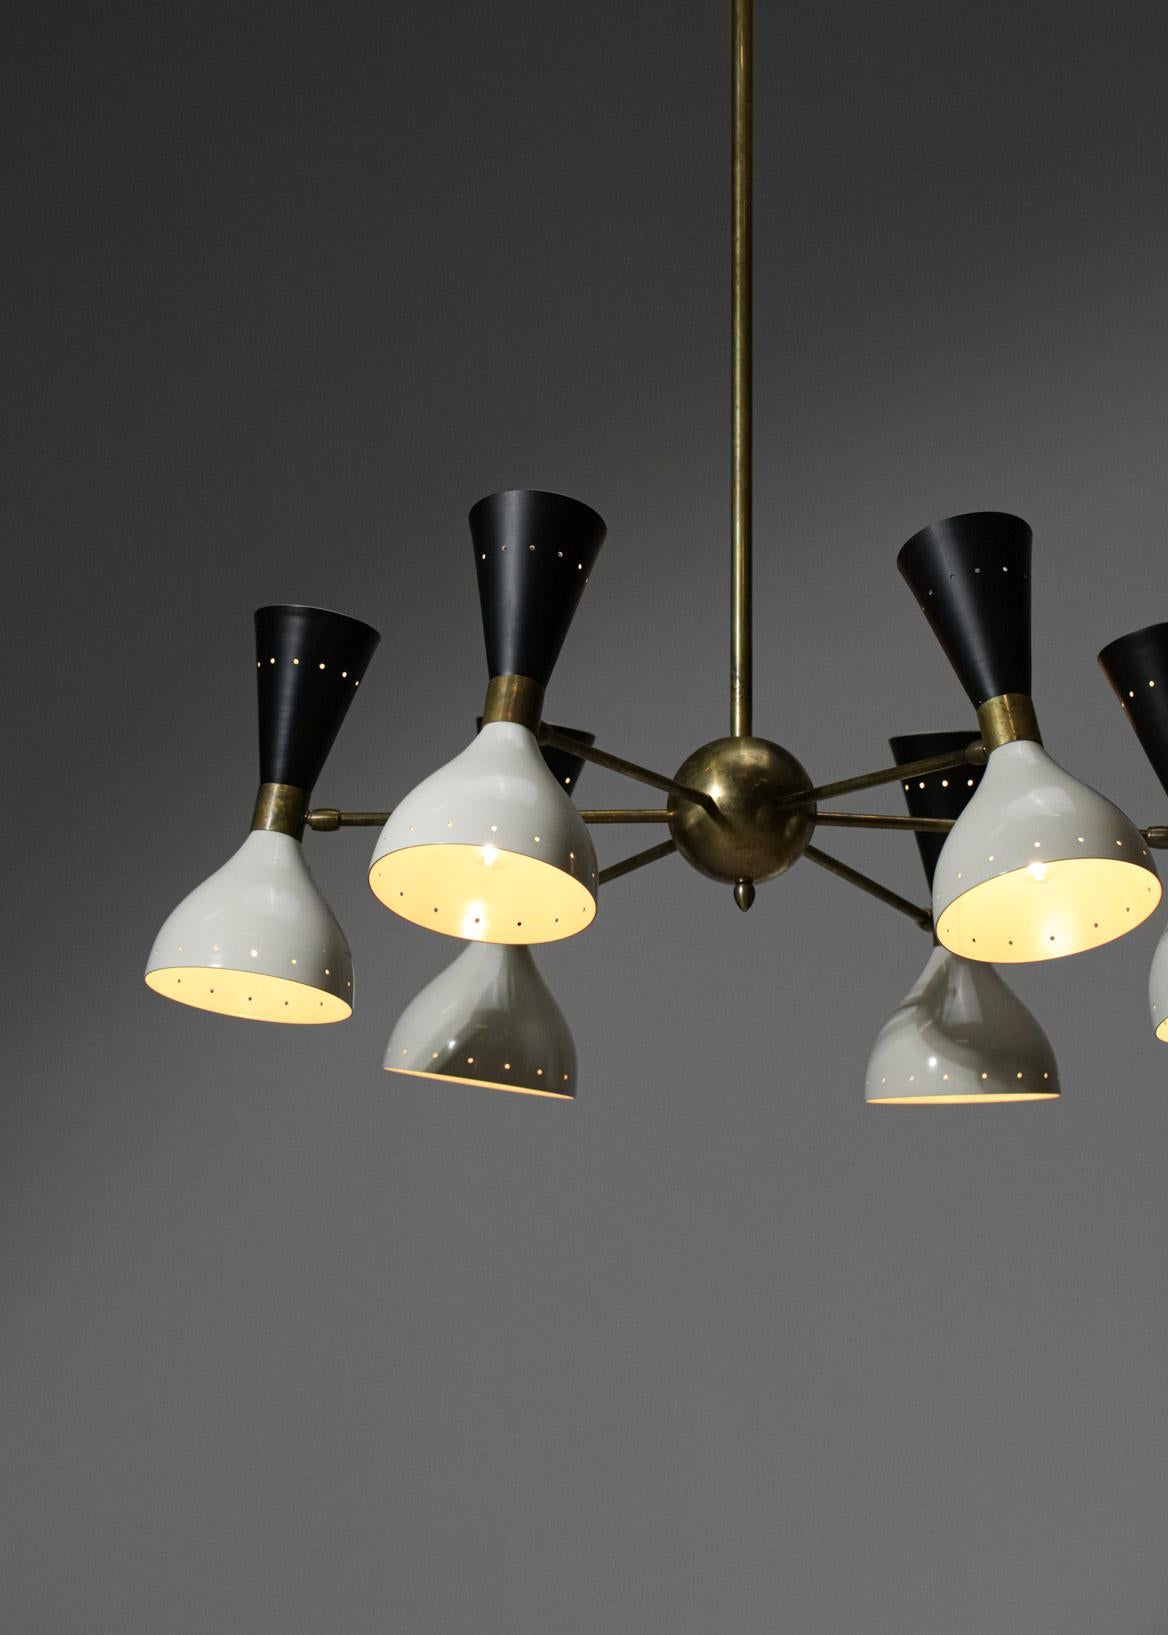 Lacquered Modern Italian Chandelier in the Style of Stilnovo Vintage Design For Sale